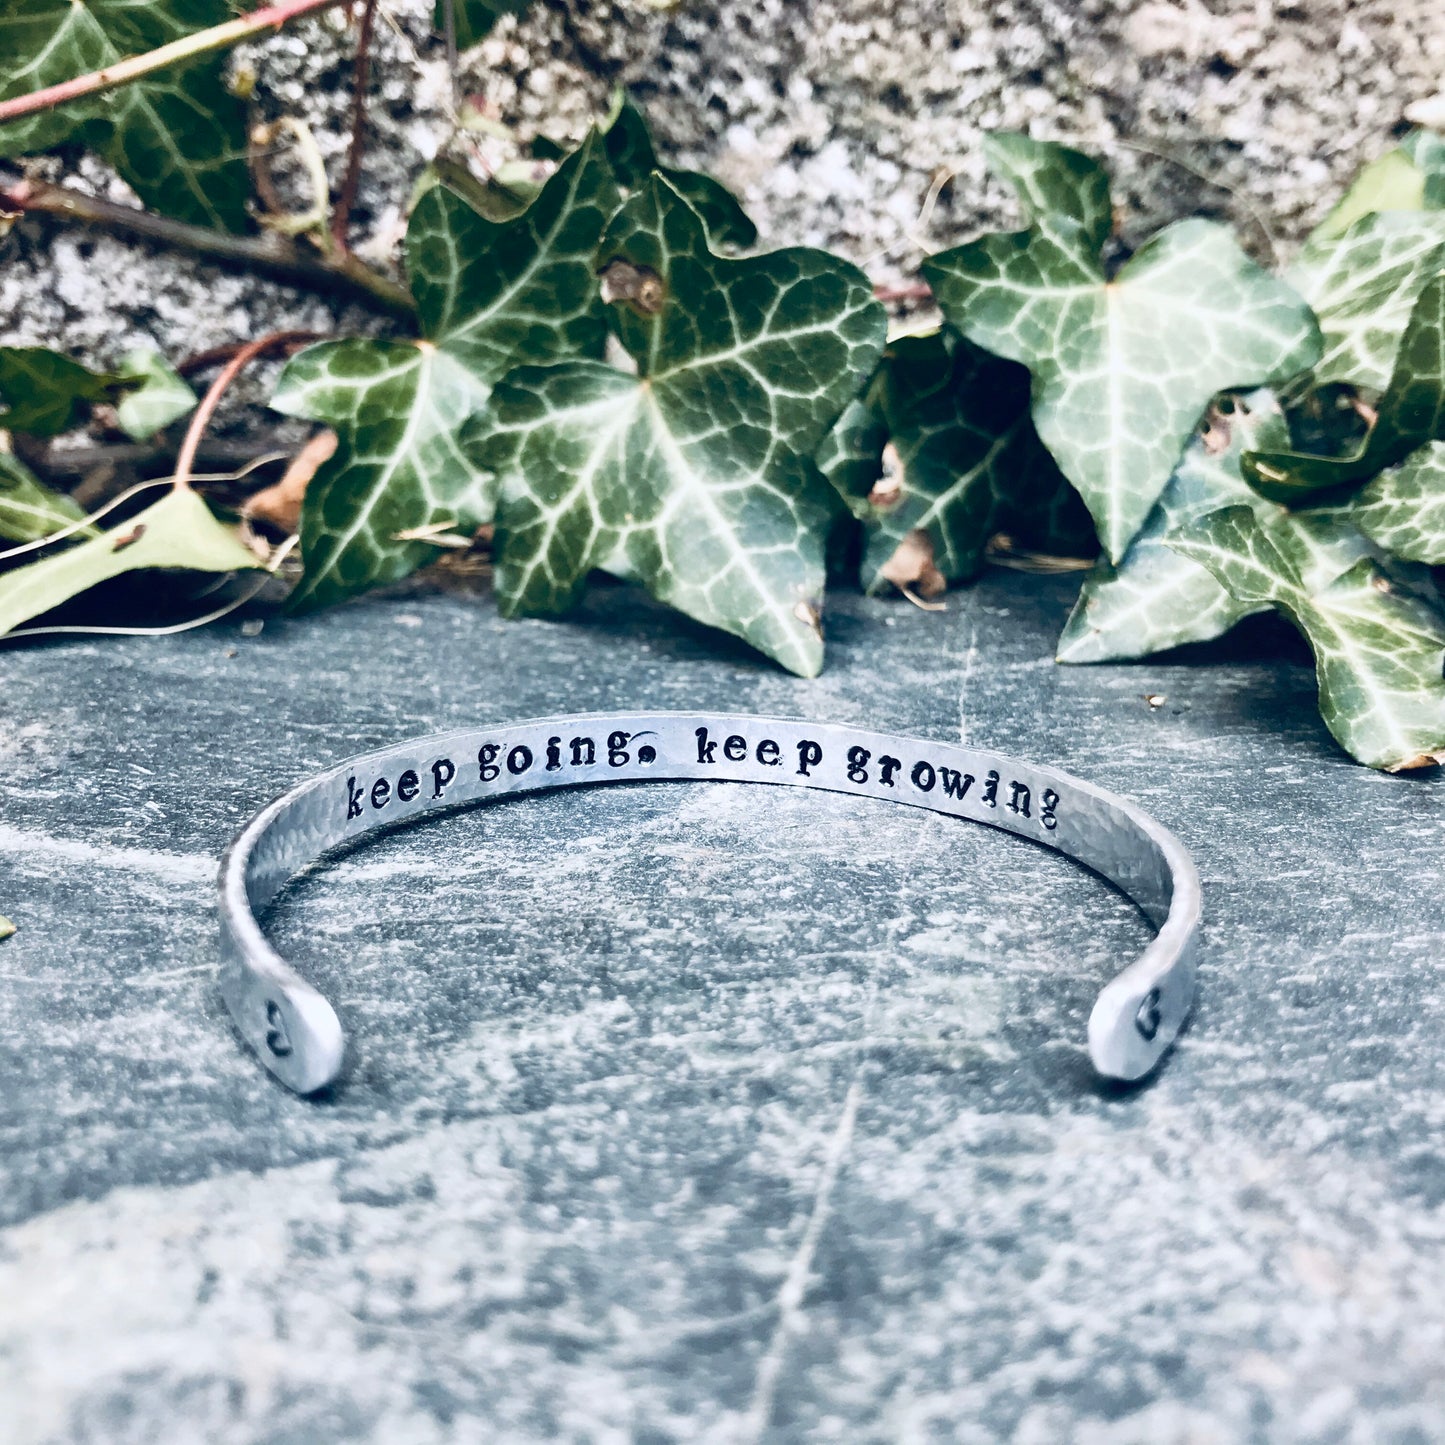 Keep Going, Keep Growing - Affirmation Band